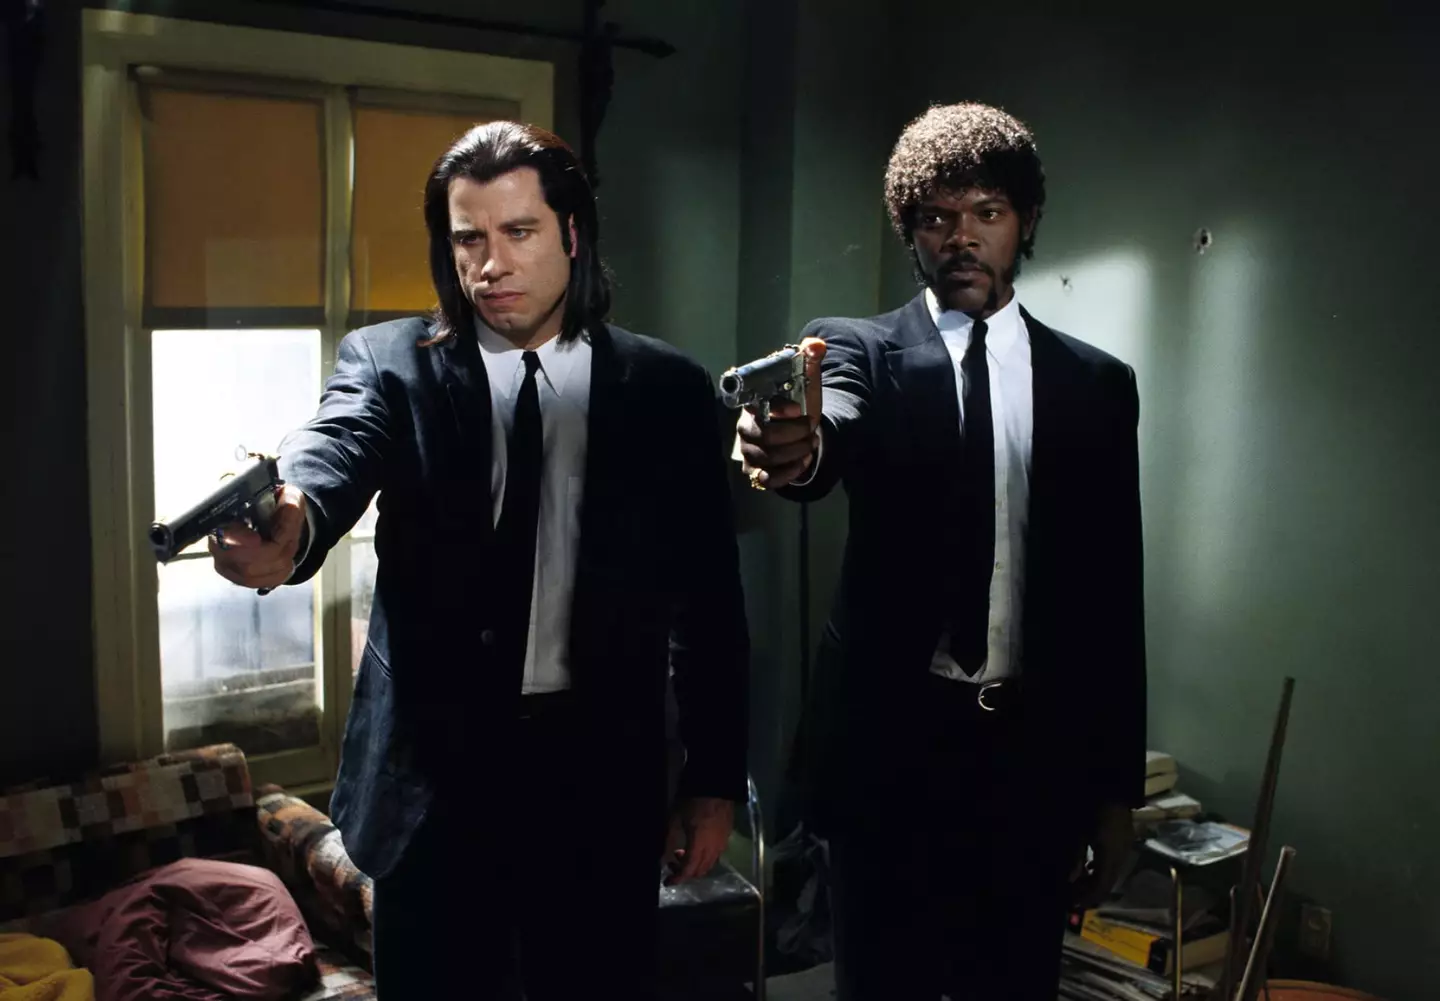 Tarantino has been no stranger to other adult themes in the films.